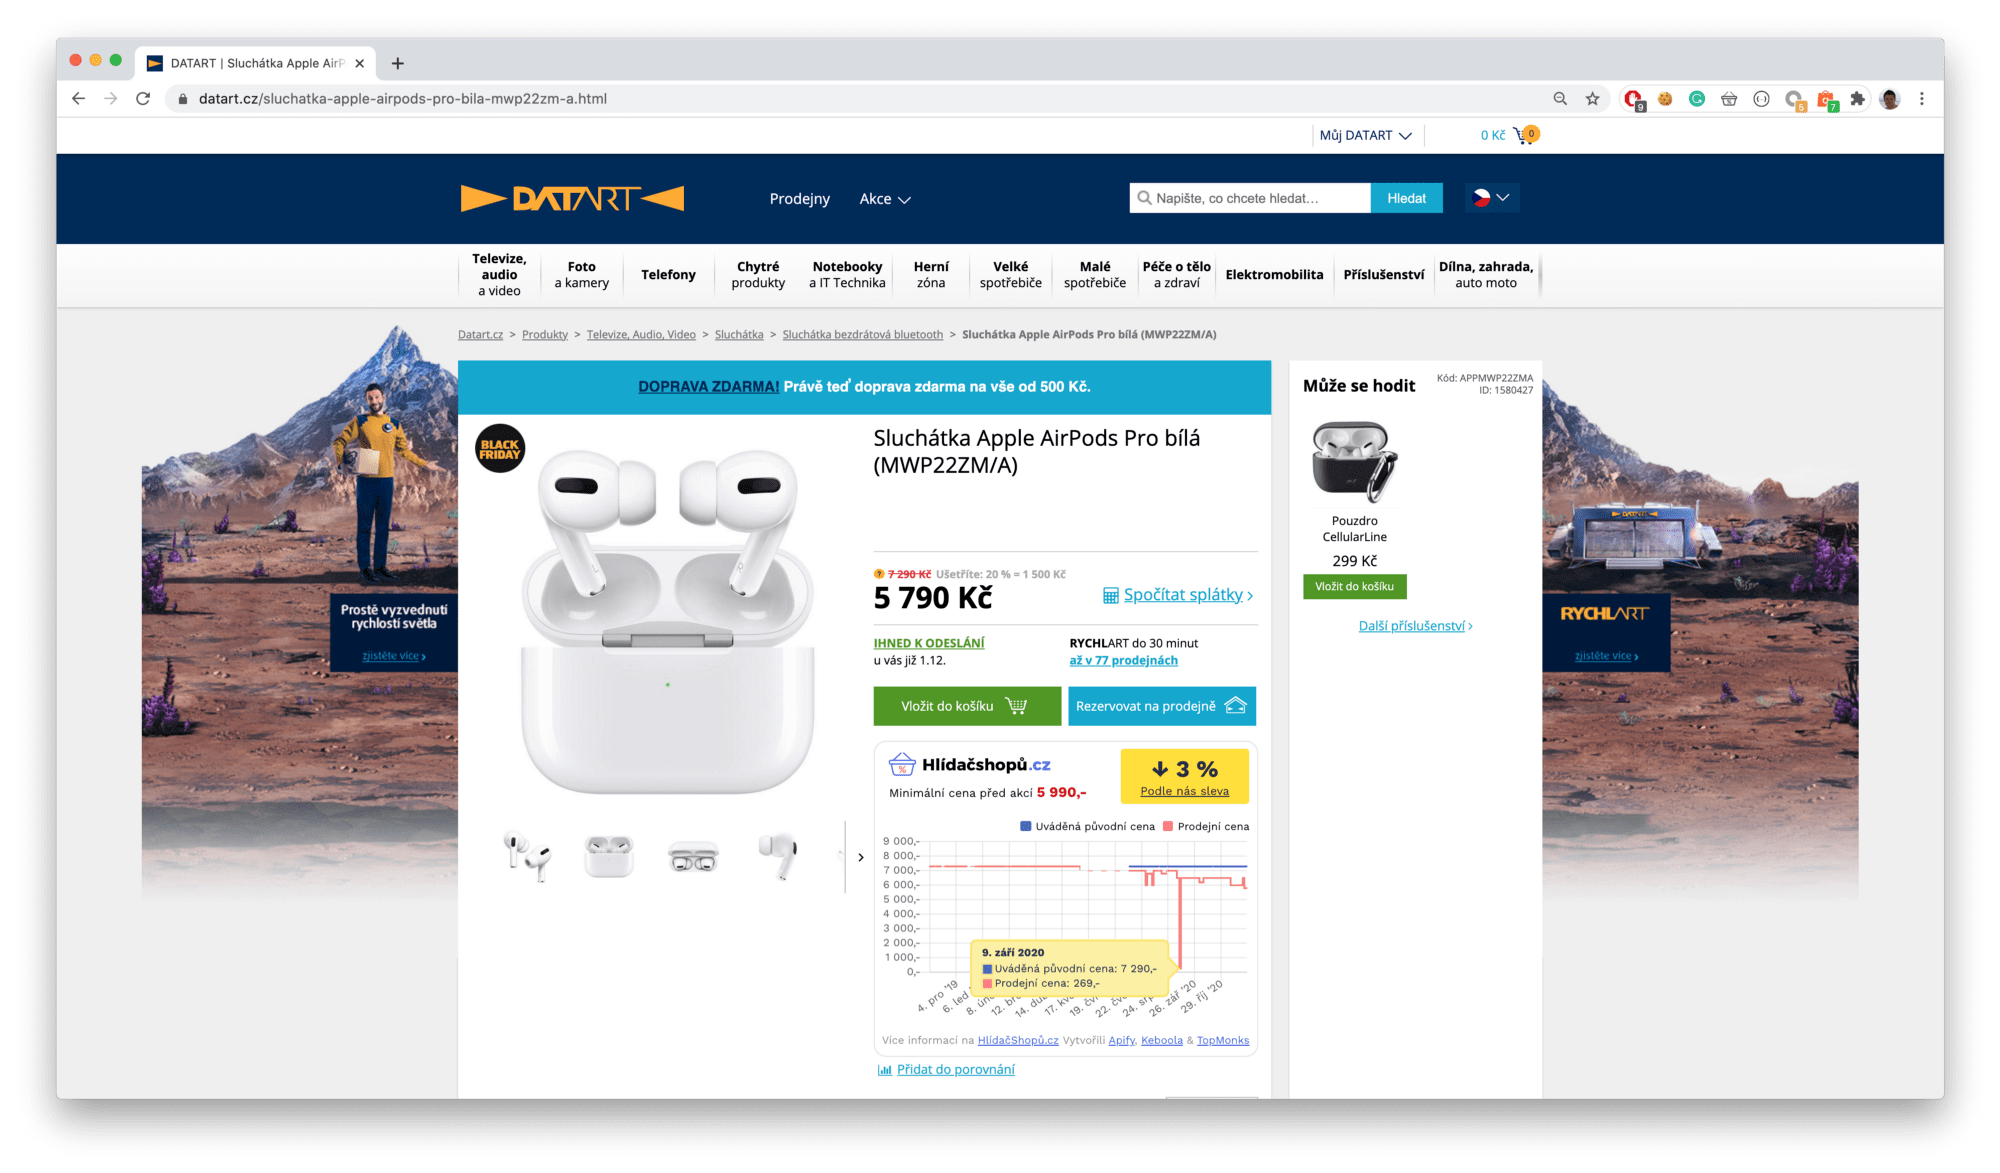 screenshot of Airpods Pro on sale at datart.cz from 7,290 CZK to 5,790 CZK